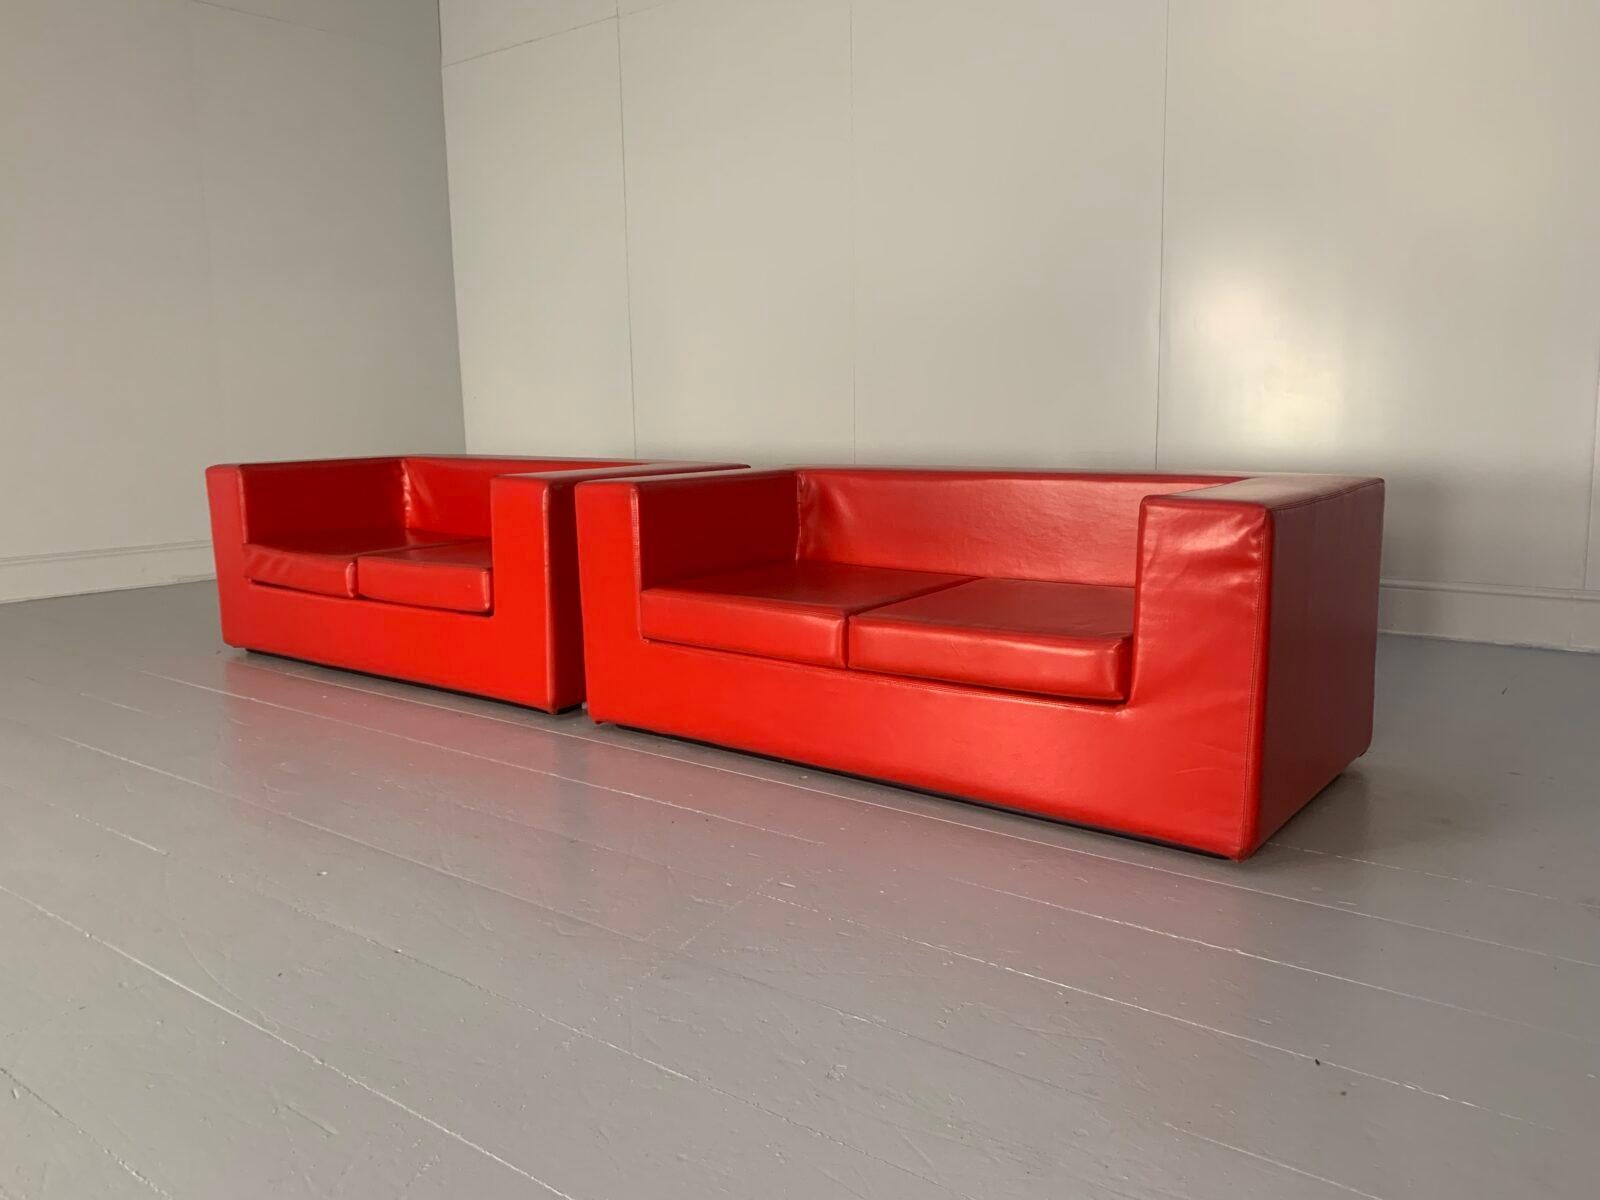 On offer on this occasion is a striking, identical pair of “Throw Away” 2-seat sofas from the world renown Italian furniture house of Zanotta, dressed in a vibrant, durable, rubberised-fabric in bright-Red.

As you will no doubt be aware by your